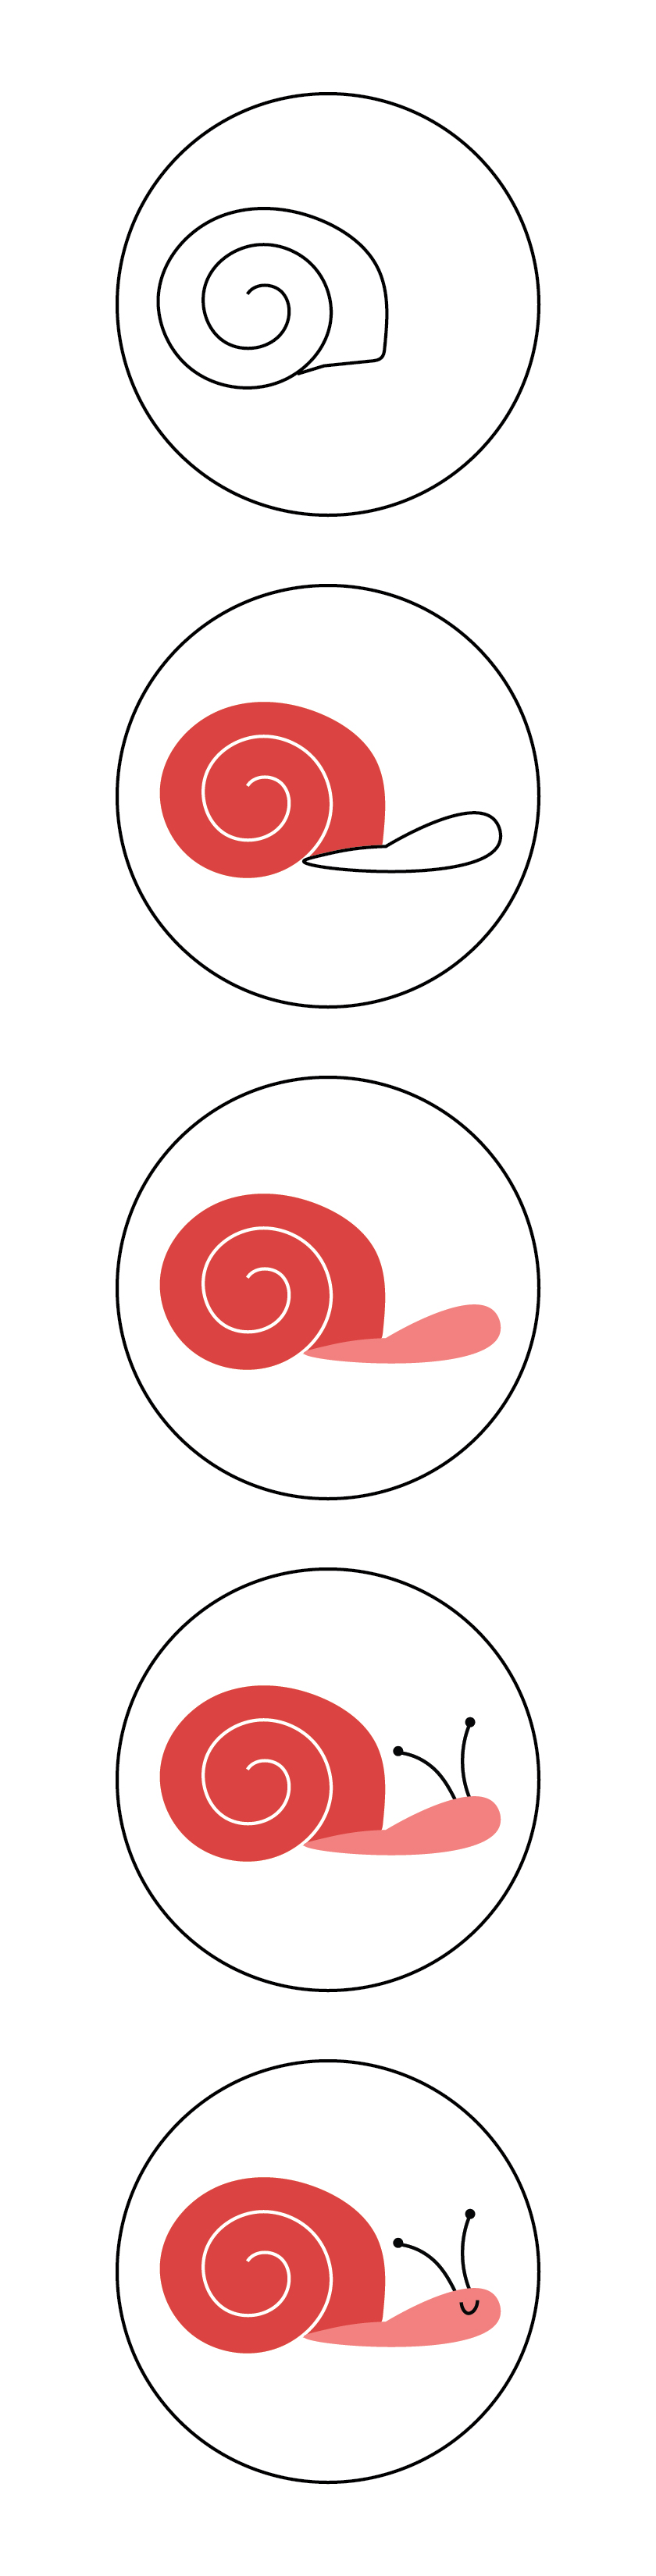 drawing guide for a snail